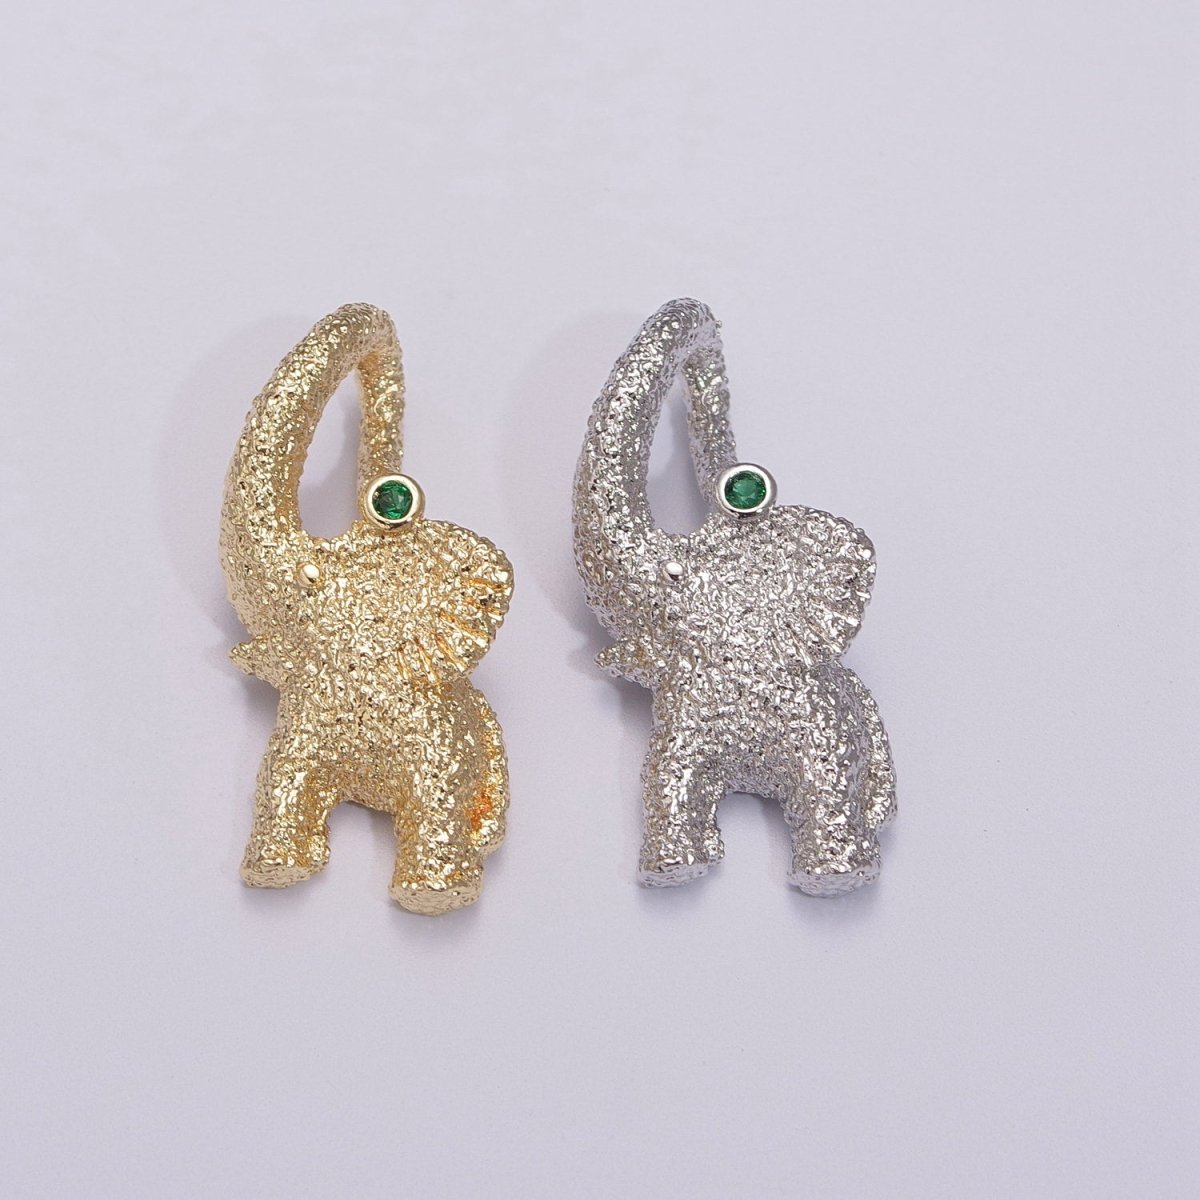 3D Elephant Charm Textured Gold / Silver Animal Jewelry Craft Supply Gold Plated over Brass E-609 E-610 - DLUXCA